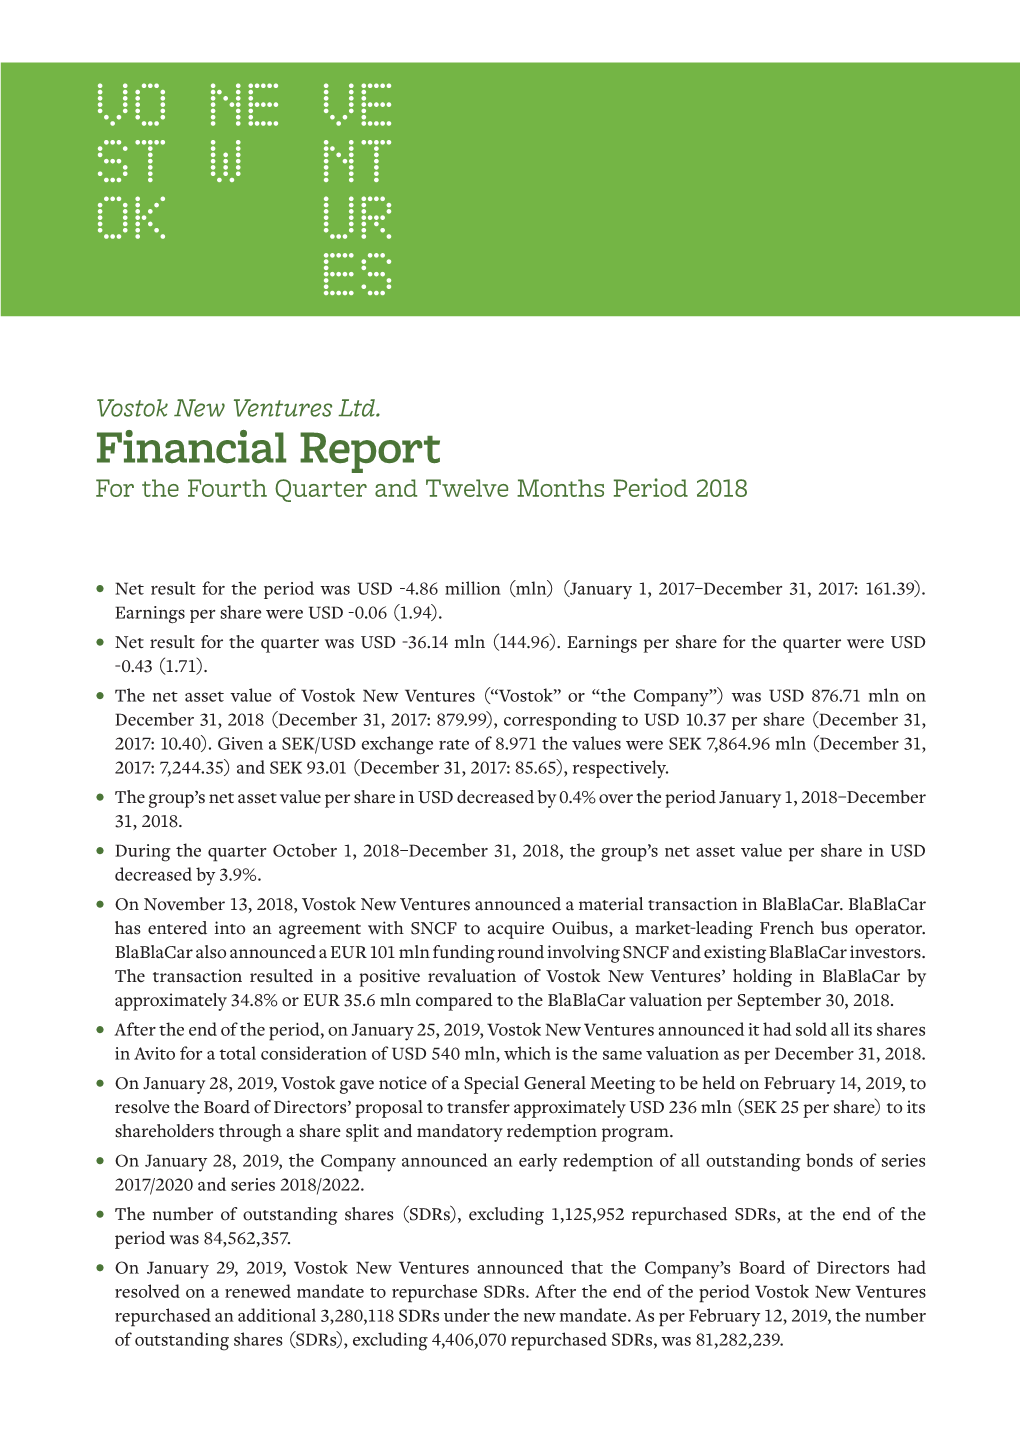 Financial Report for the Fourth Quarter and Twelve Months Period 2018